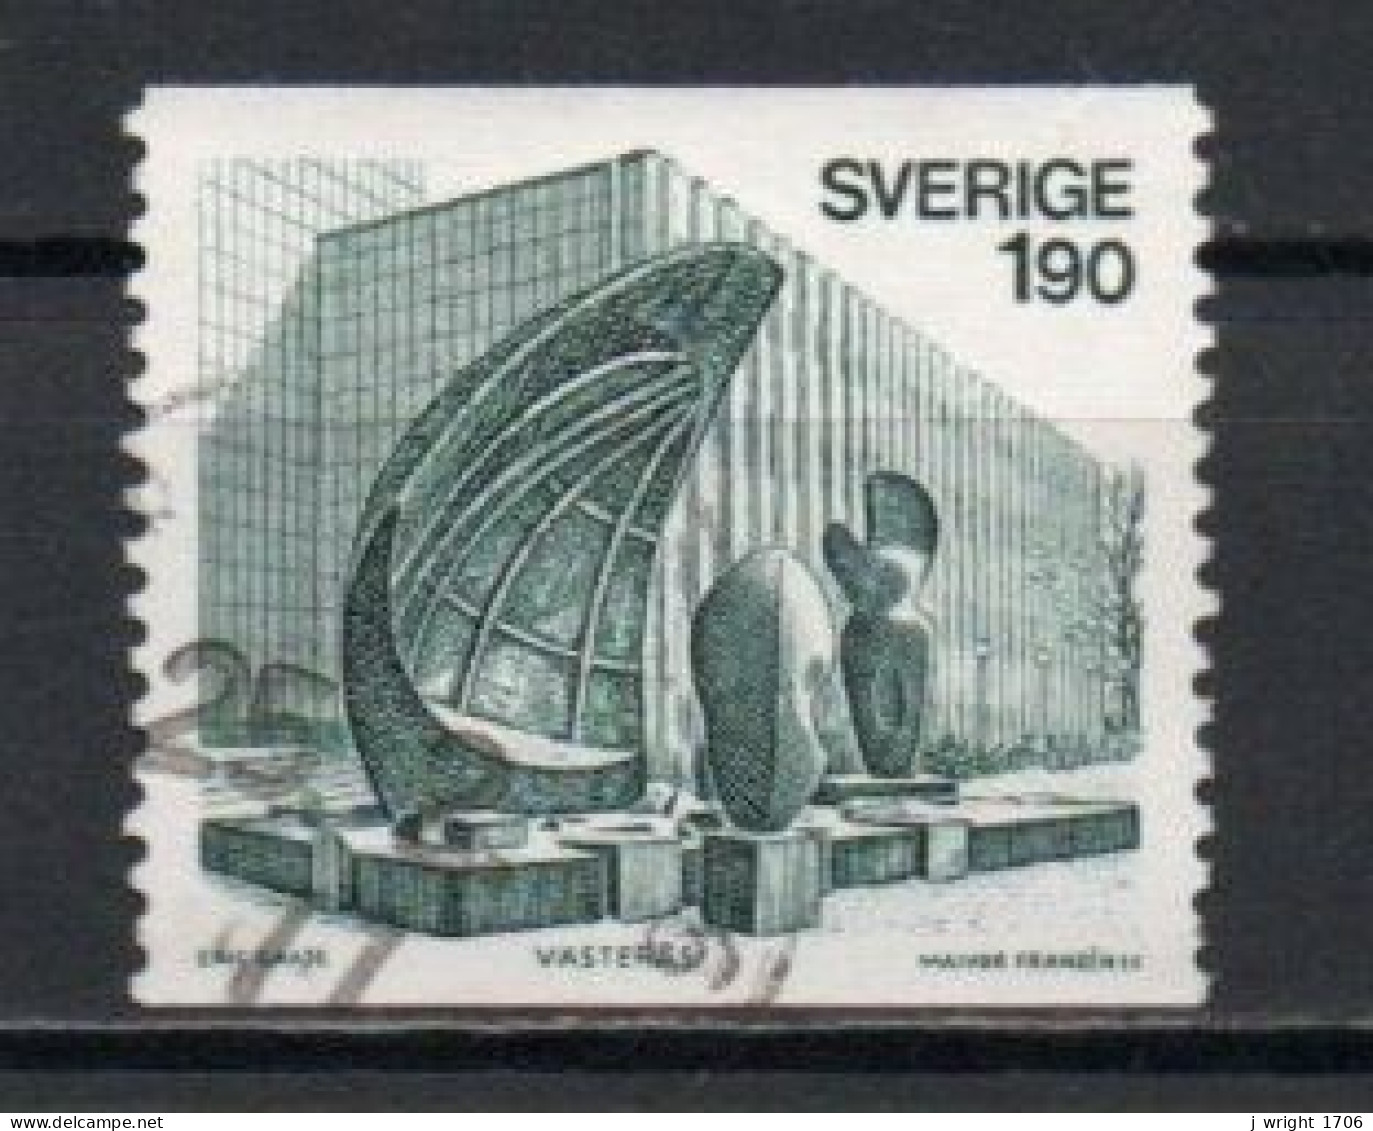 Sweden, 1976, Cave Of The Winds, 1.90kr, USED - Used Stamps